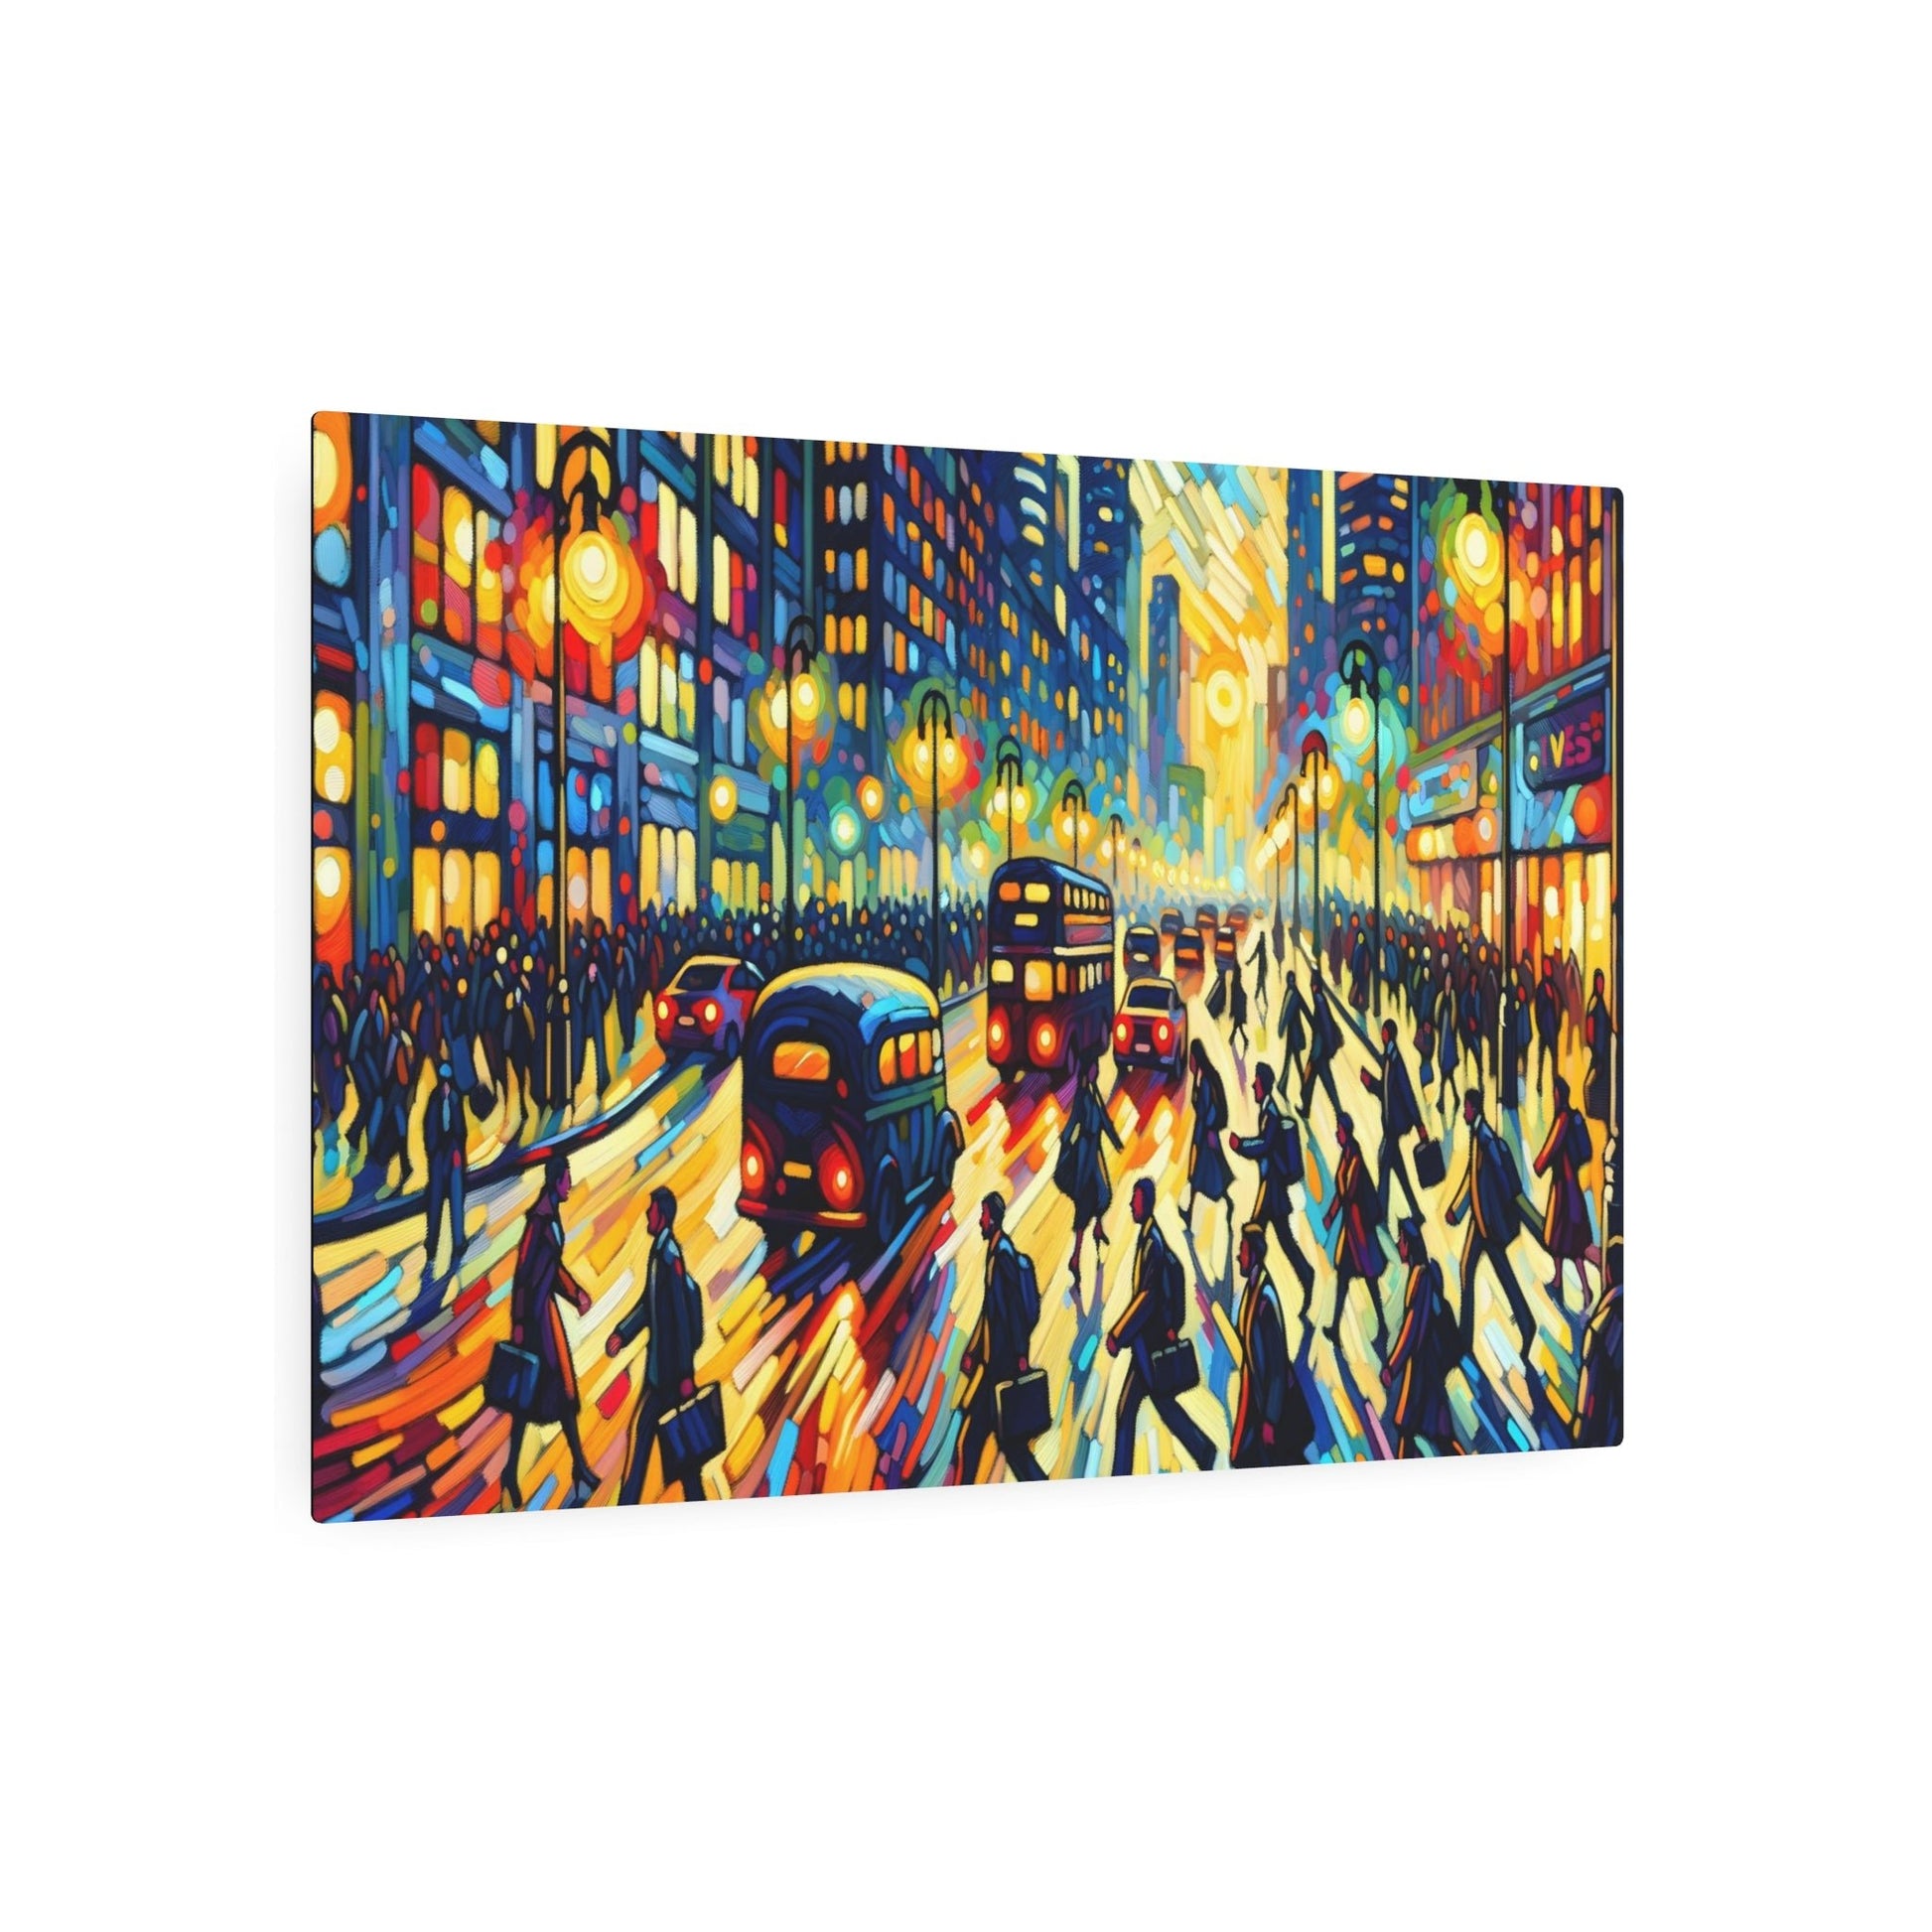 Metal Poster Art | "Expressionist Western Art: Animated City Street Scene in Evening - Vibrant and Passionate Expressionism Painting of People Rushing Home After Work" - Metal Poster Art 36″ x 24″ (Horizontal) 0.12''